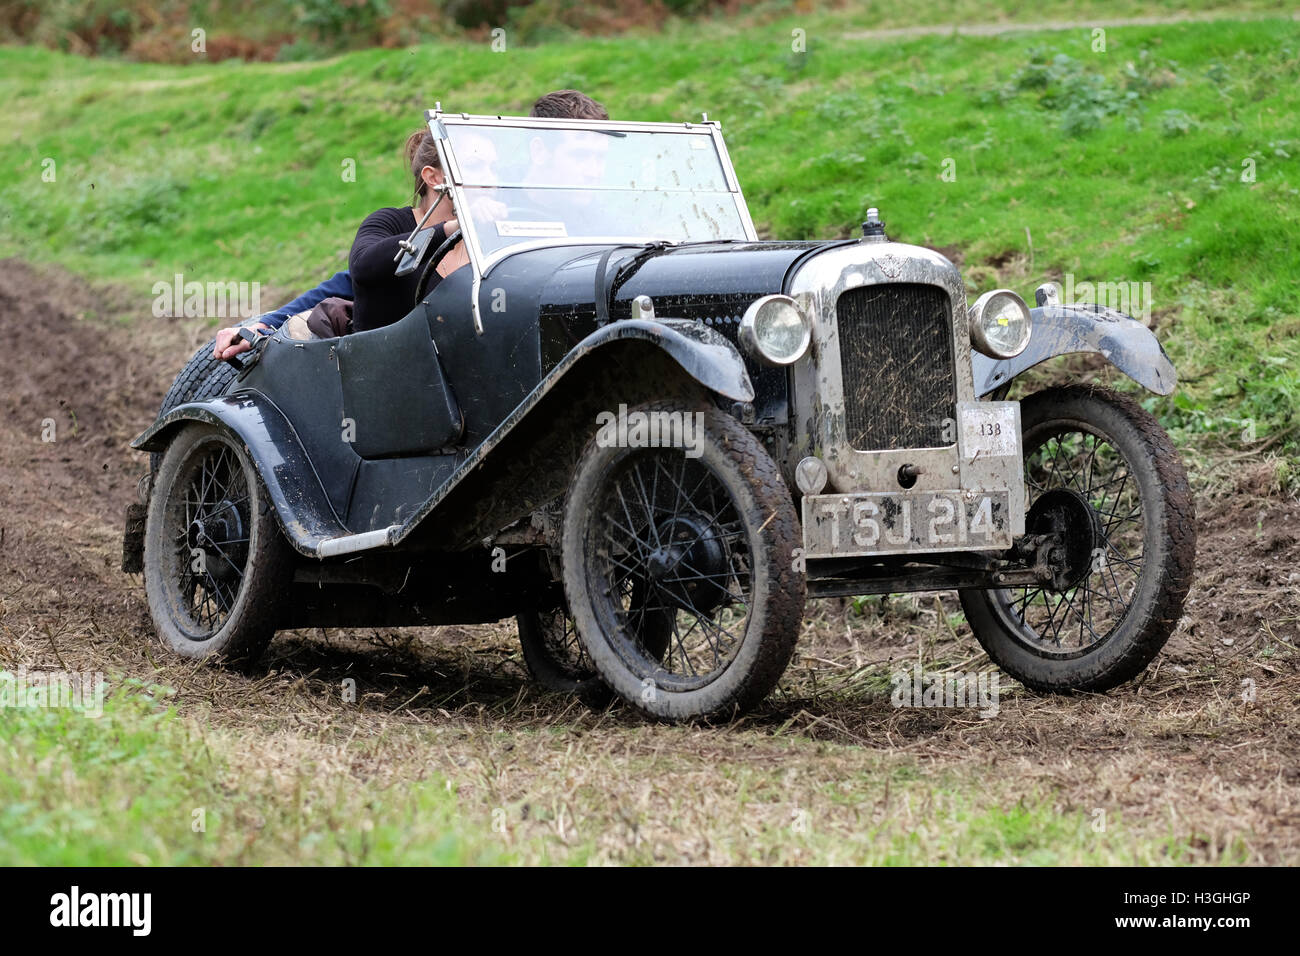 Badlands Farm, Kinnerton, Powys, Wales, UK - Saturday 8th October 2016 - Competitors in a 1930 Austin 7 Gordon England Cup take part in the Vintage Sports-Car Club ( VSCC ) hill climb at Badlands a long muddy track and hillside climb in Powys. Competitors earn points not for speed or time but how far up the hill they manage to drive their vintage sports car. Stock Photo